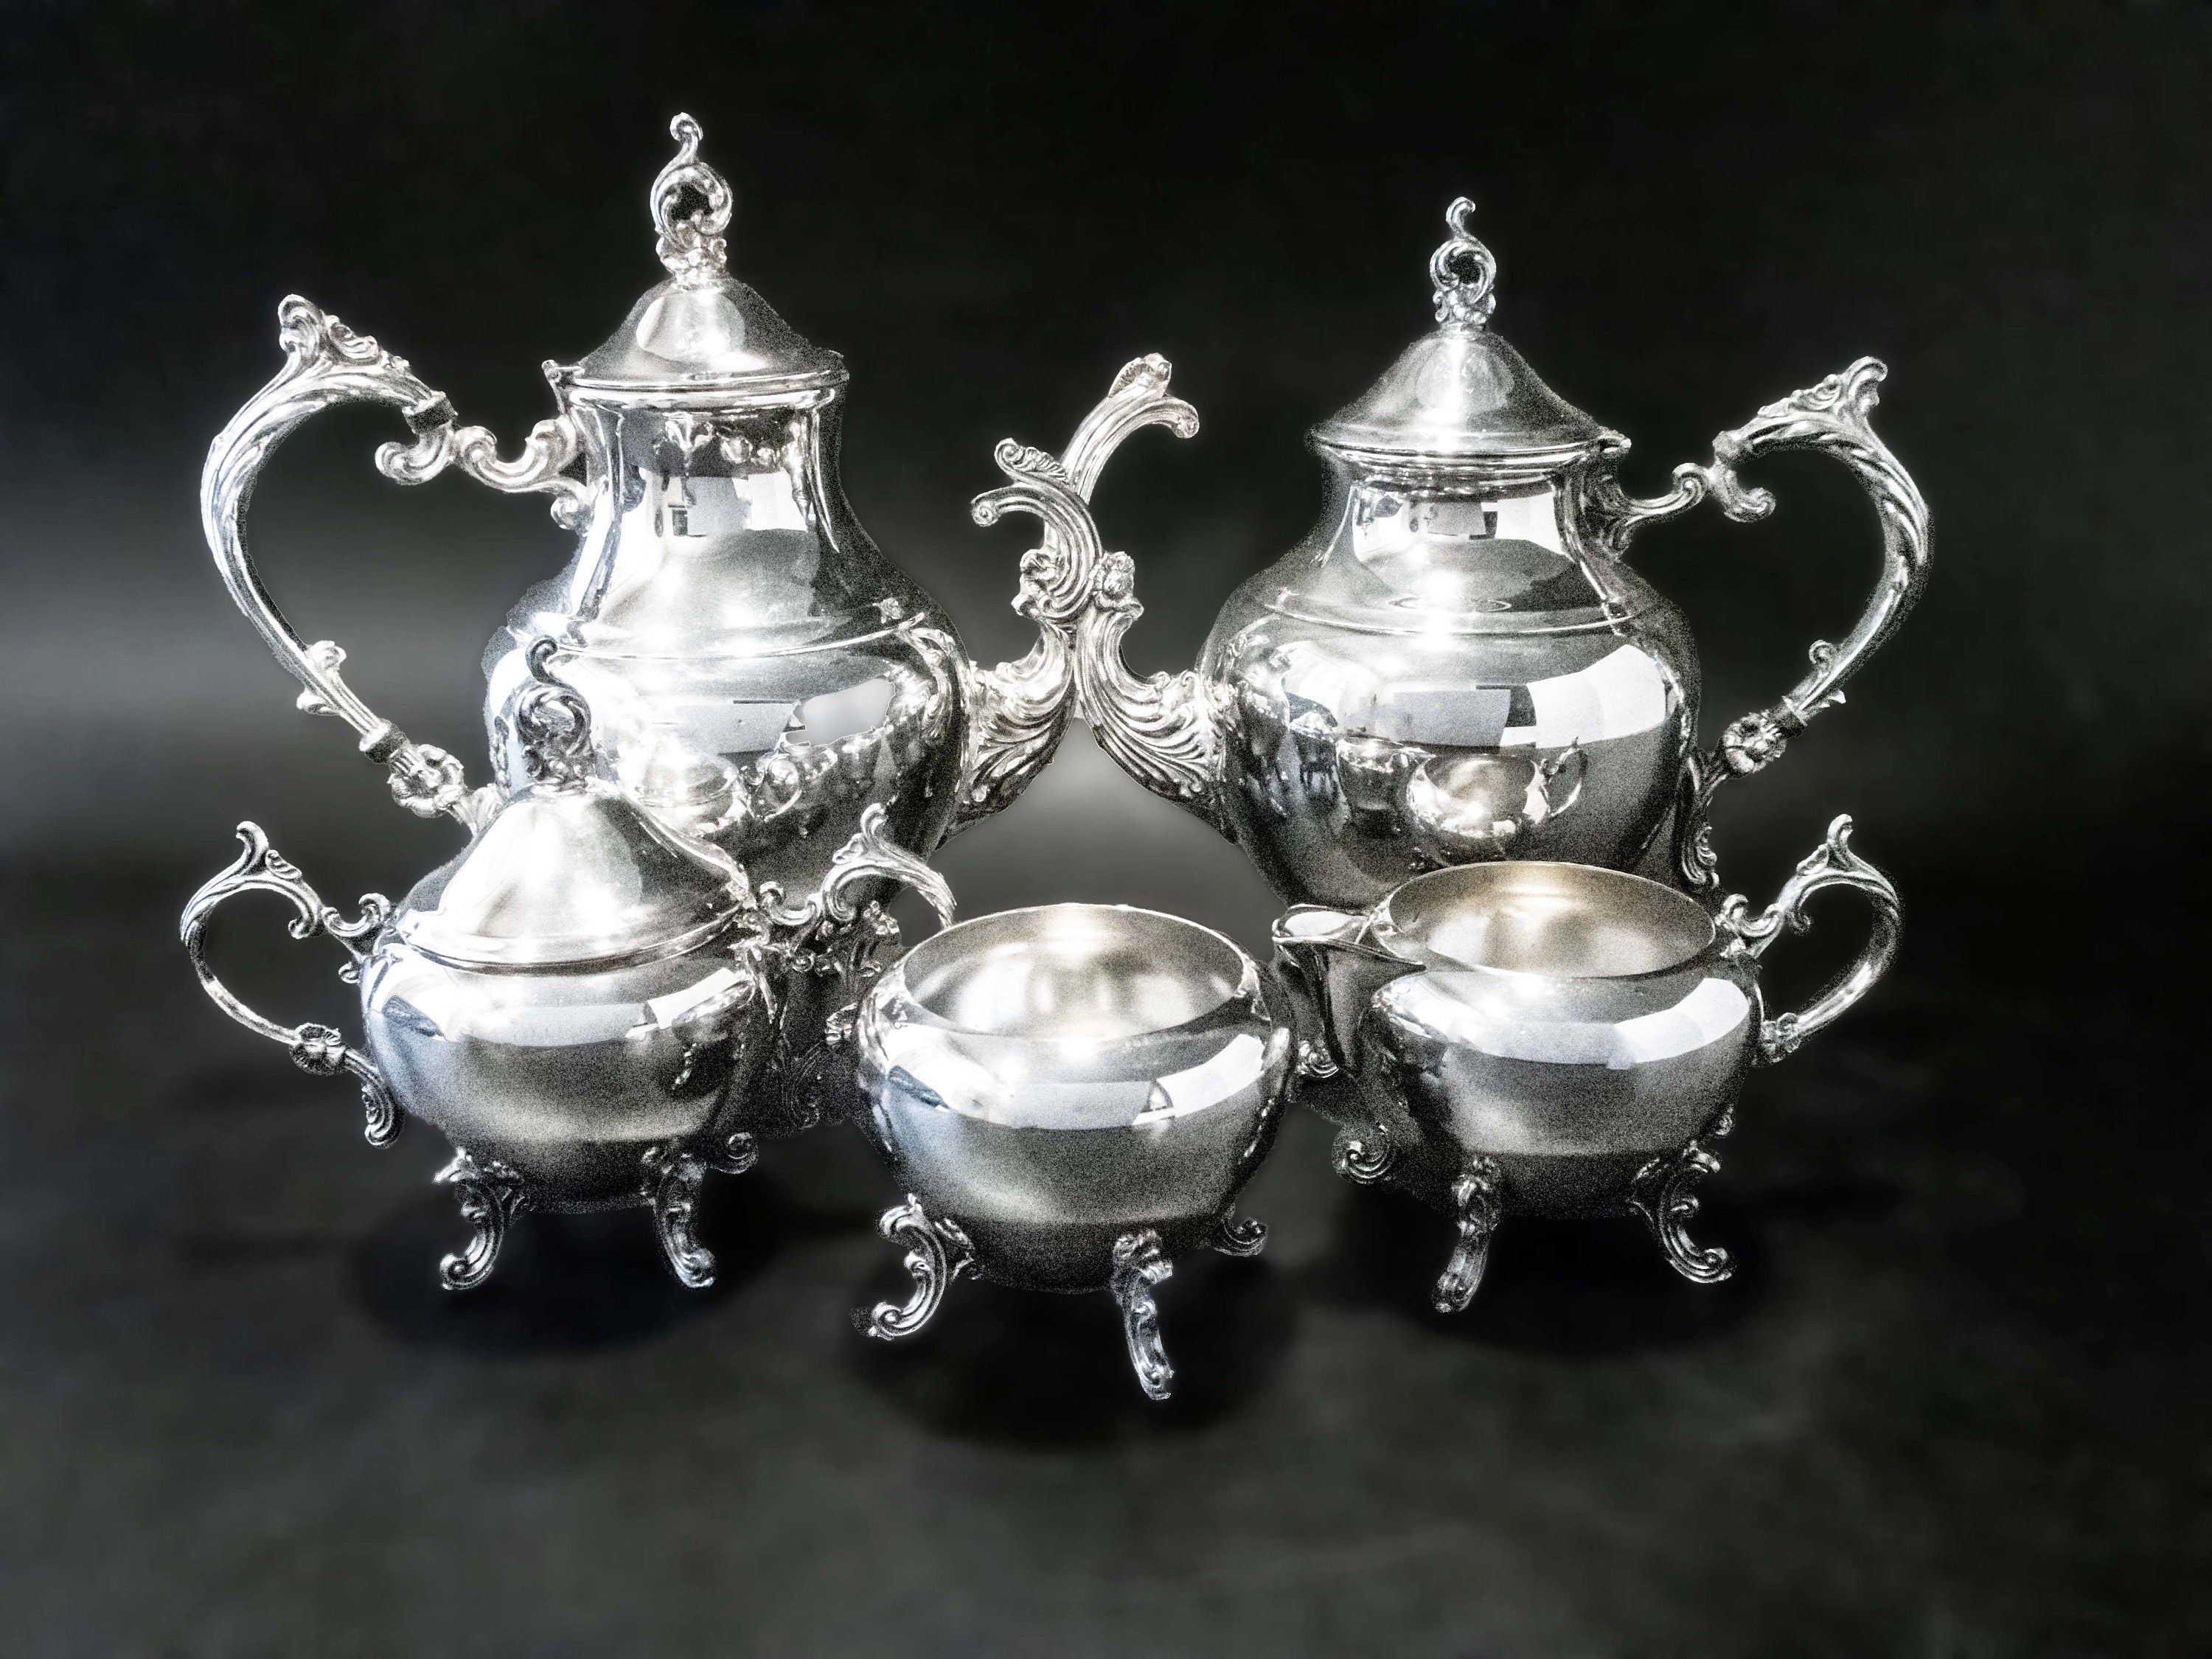 Vintage Coffee and Tea Service 6,600+ for Sale at Chairish